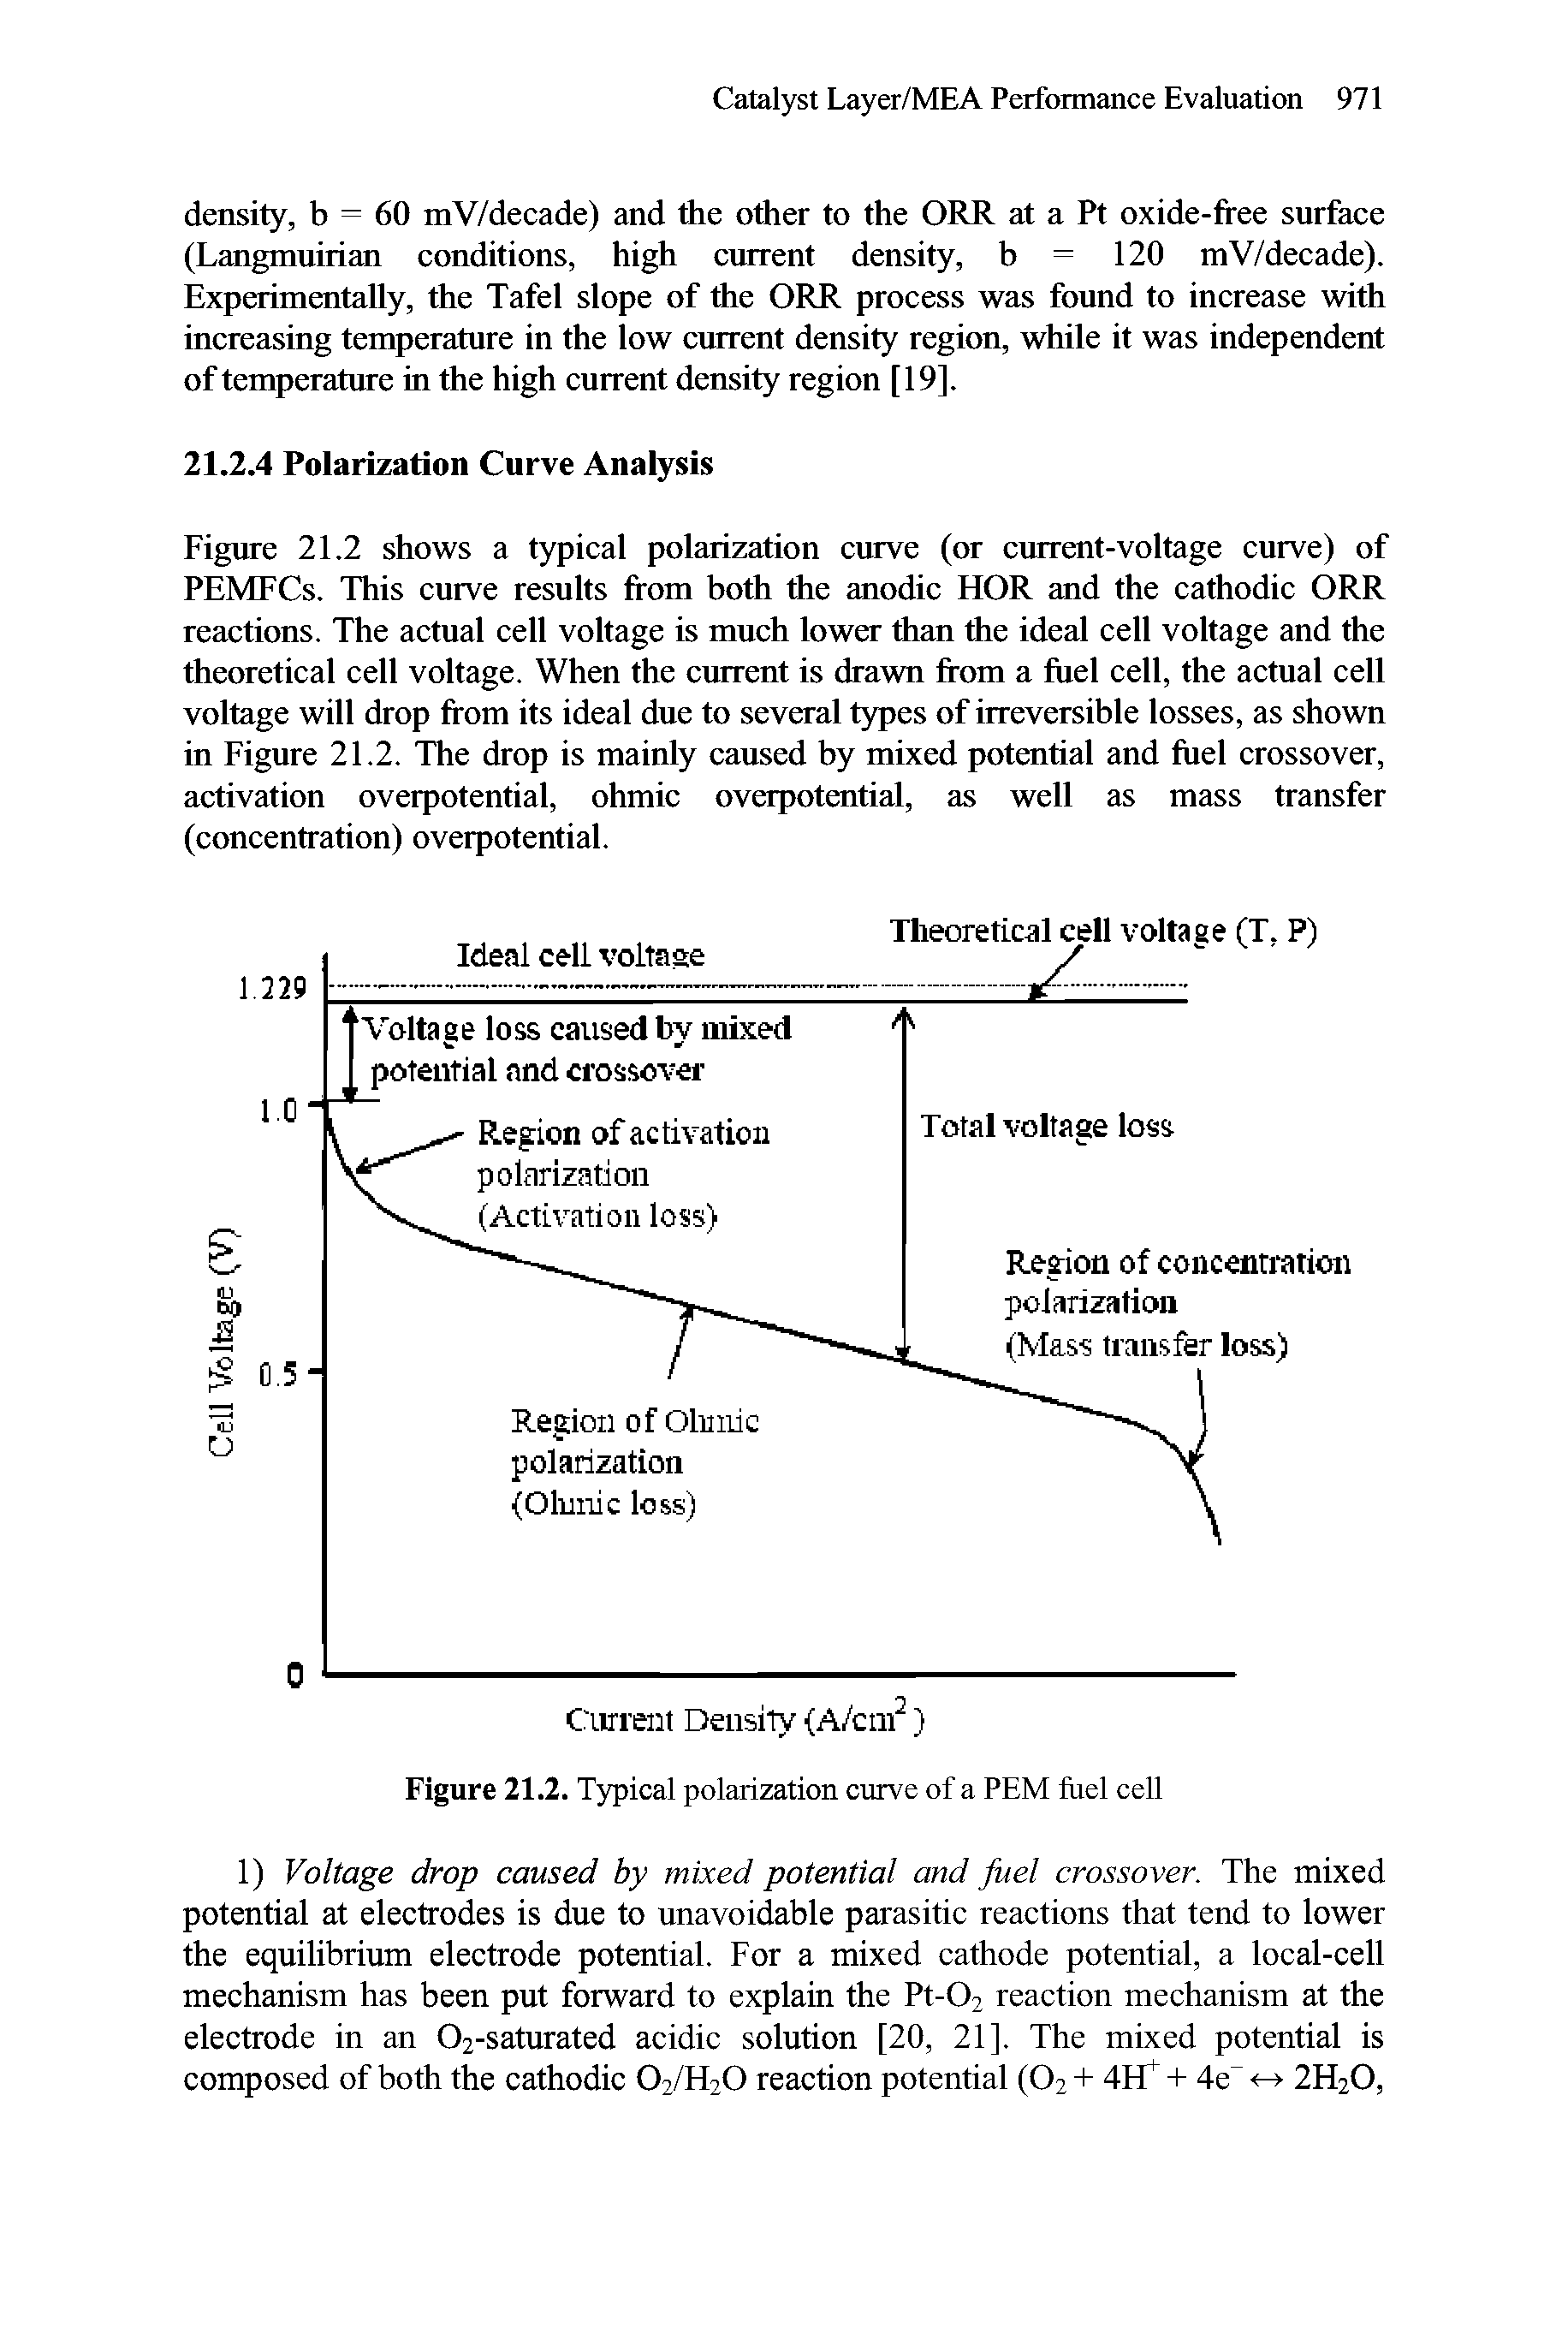 Figure 21.2 shows a typical polarization curve (or current-voltage curve) of PEMFCs. This curve results from both the anodic HOR and the cathodic ORR reactions. The actual celt voltage is much lower than the ideal celt voltage and the theoretical cell voltage. When the current is drawn from a fuel cell, the actual cell voltage will drop from its ideal due to several types of irreversible losses, as shown in Figure 21.2. The drop is mainly caused by mixed potential and fuel crossover, activation overpotential, ohmic overpotential, as well as mass transfer (concentration) overpotential.